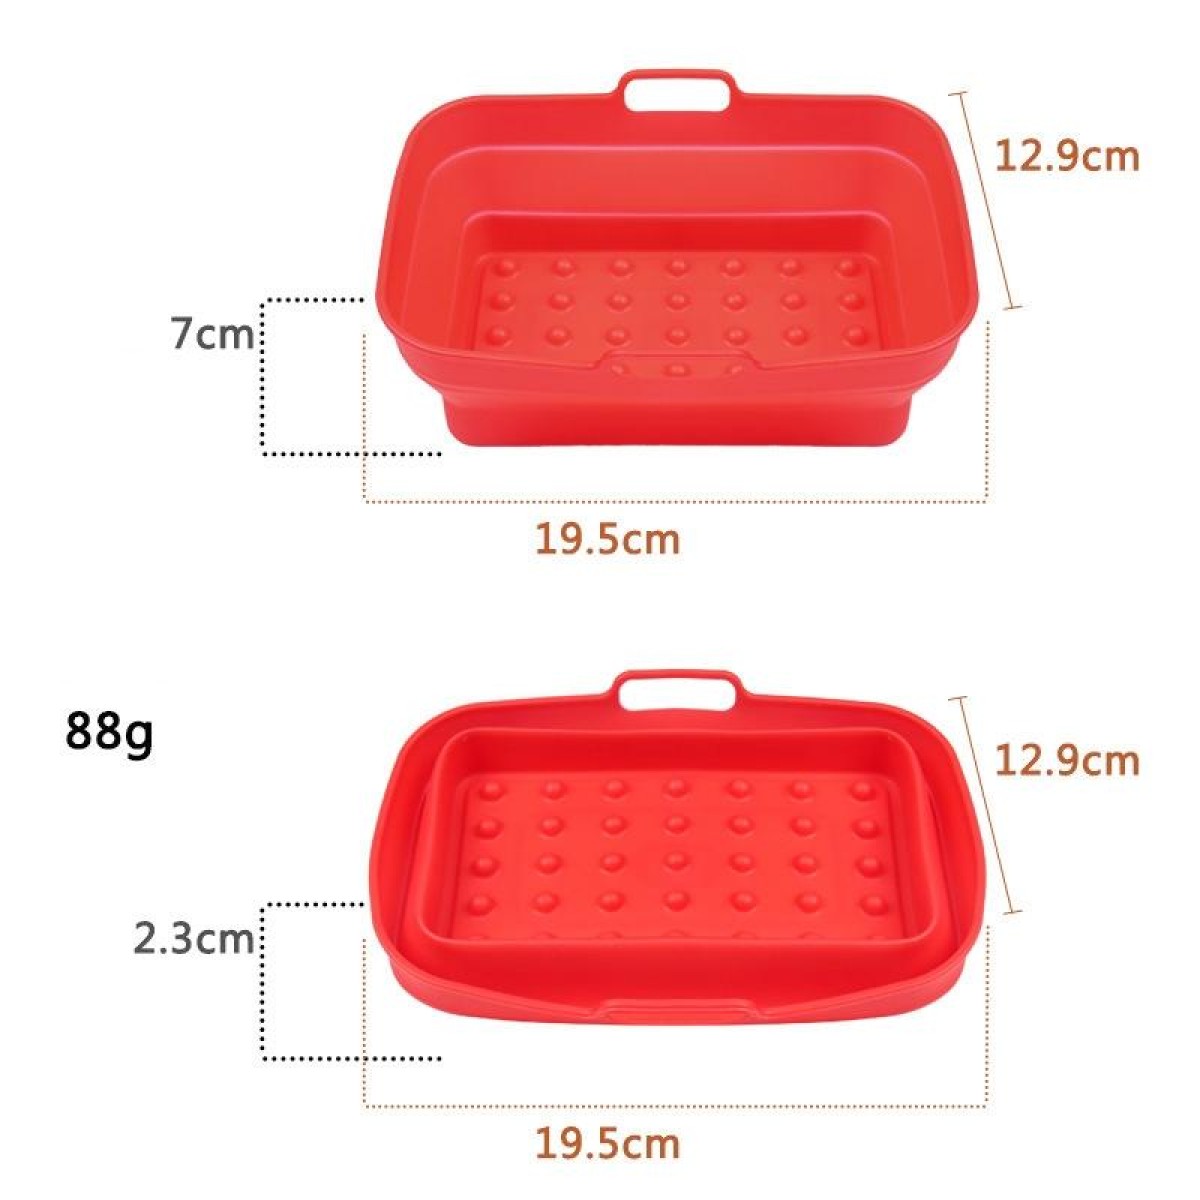 Air Fryer Grill Mat High Temperature Resistant Silicone Baking Tray, Specification: Rectangular Dot Red